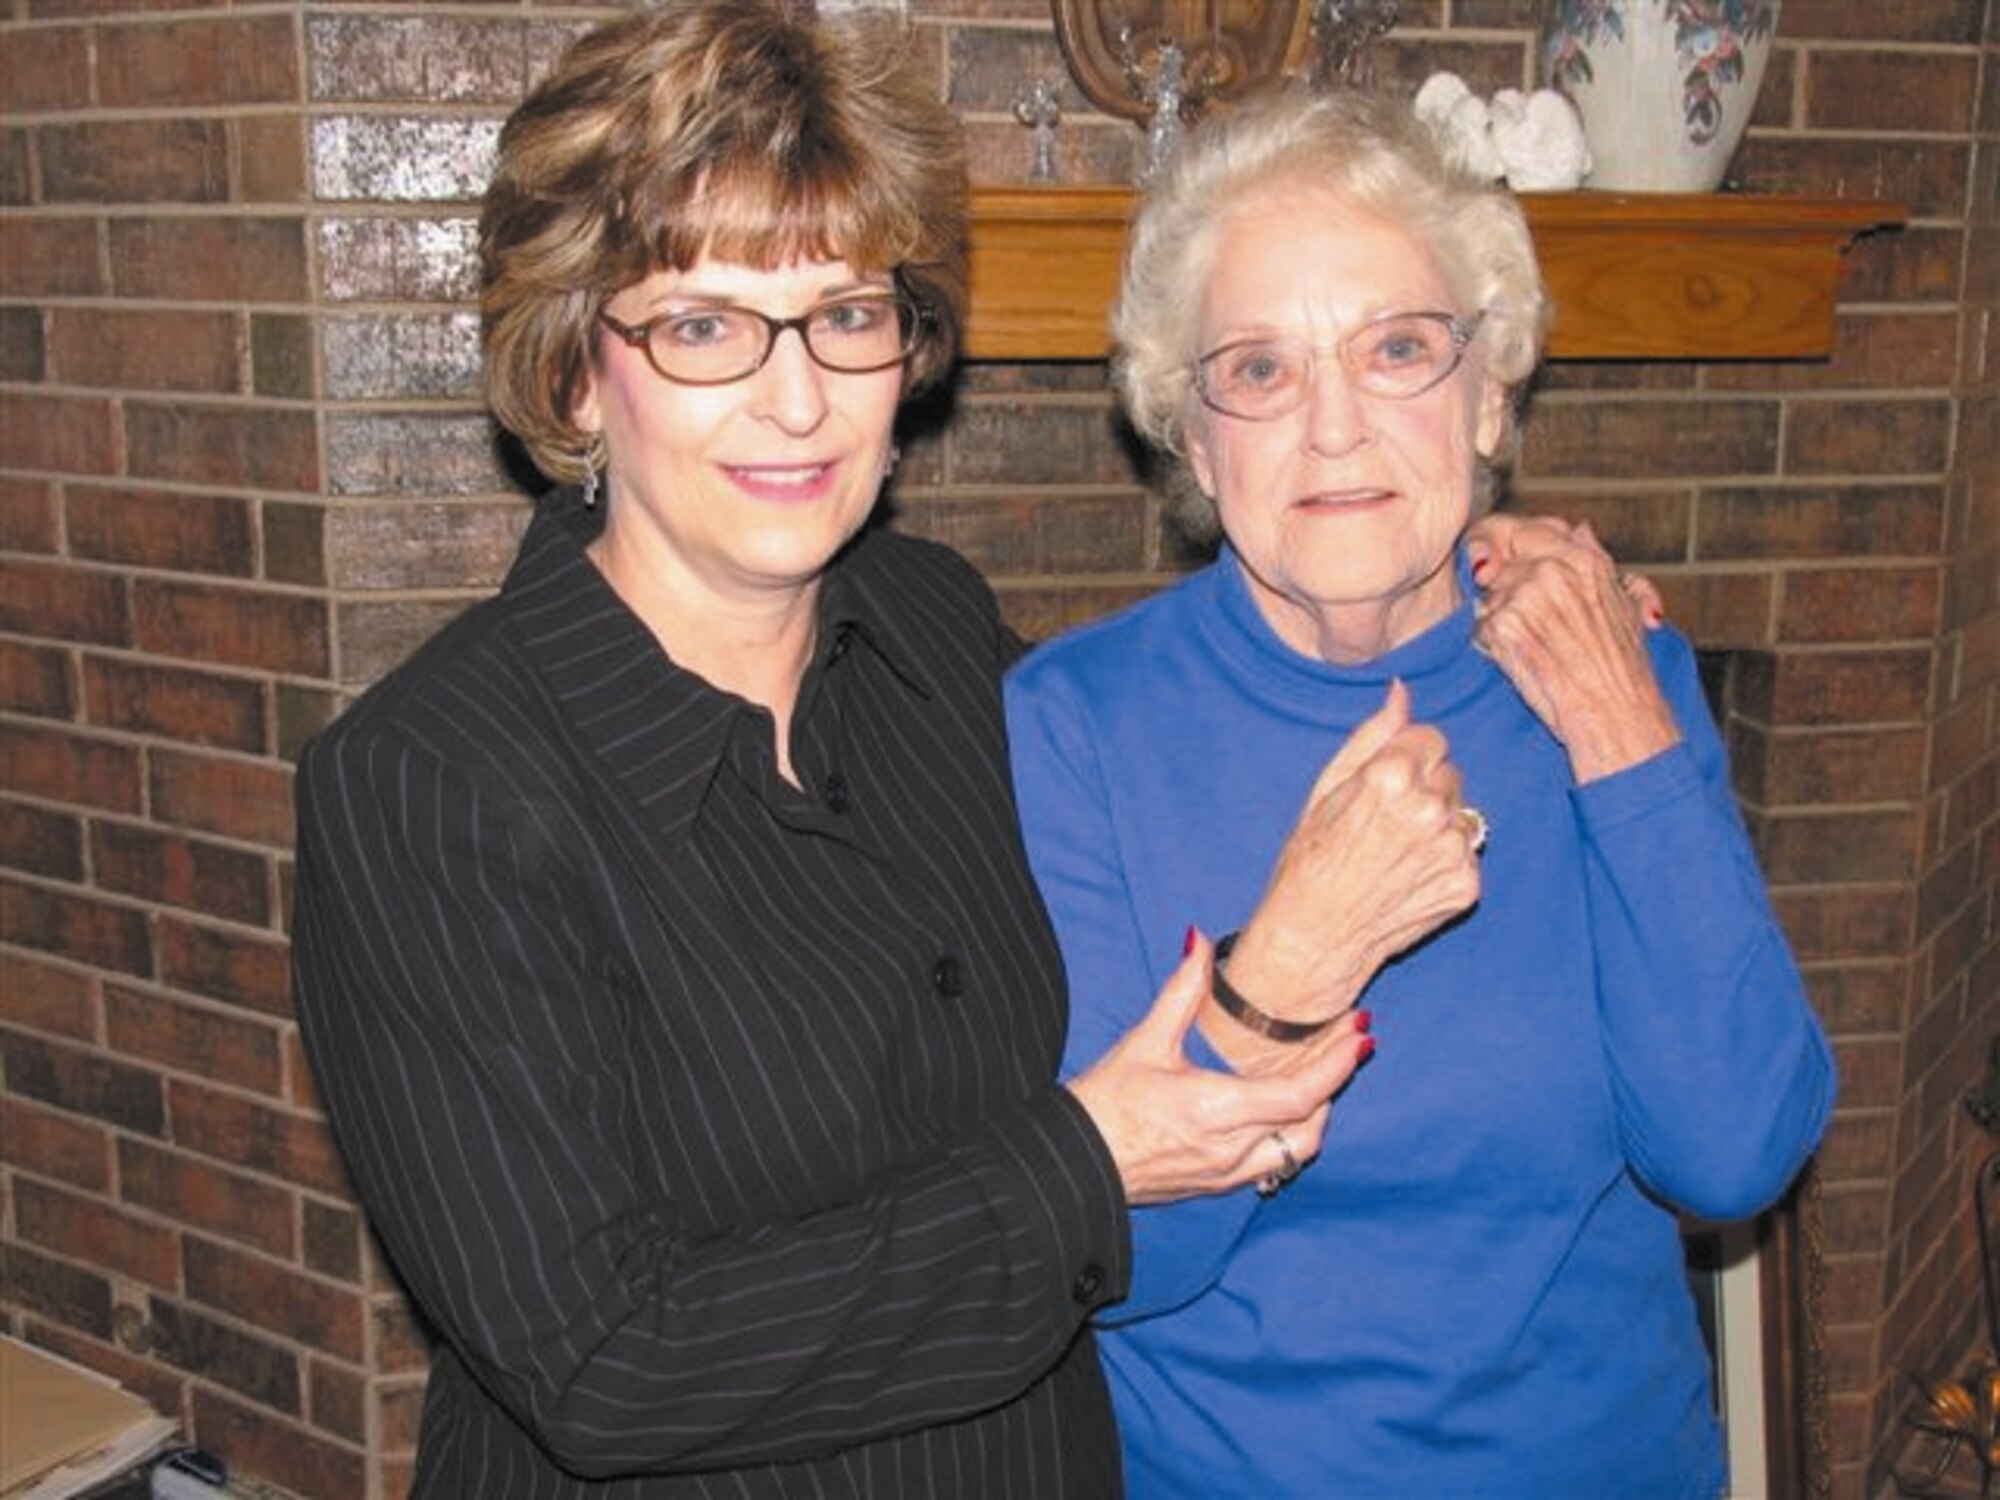 Carol Oakley presents a POW/MIA bracelet bearing the name Maj. Frederick Ransbottom to his mother, Laverne Ransbottom. The major’s remains were recently recovered and identified in Vietnam, ending a 38-year search by his family. (Courtesy photo) 